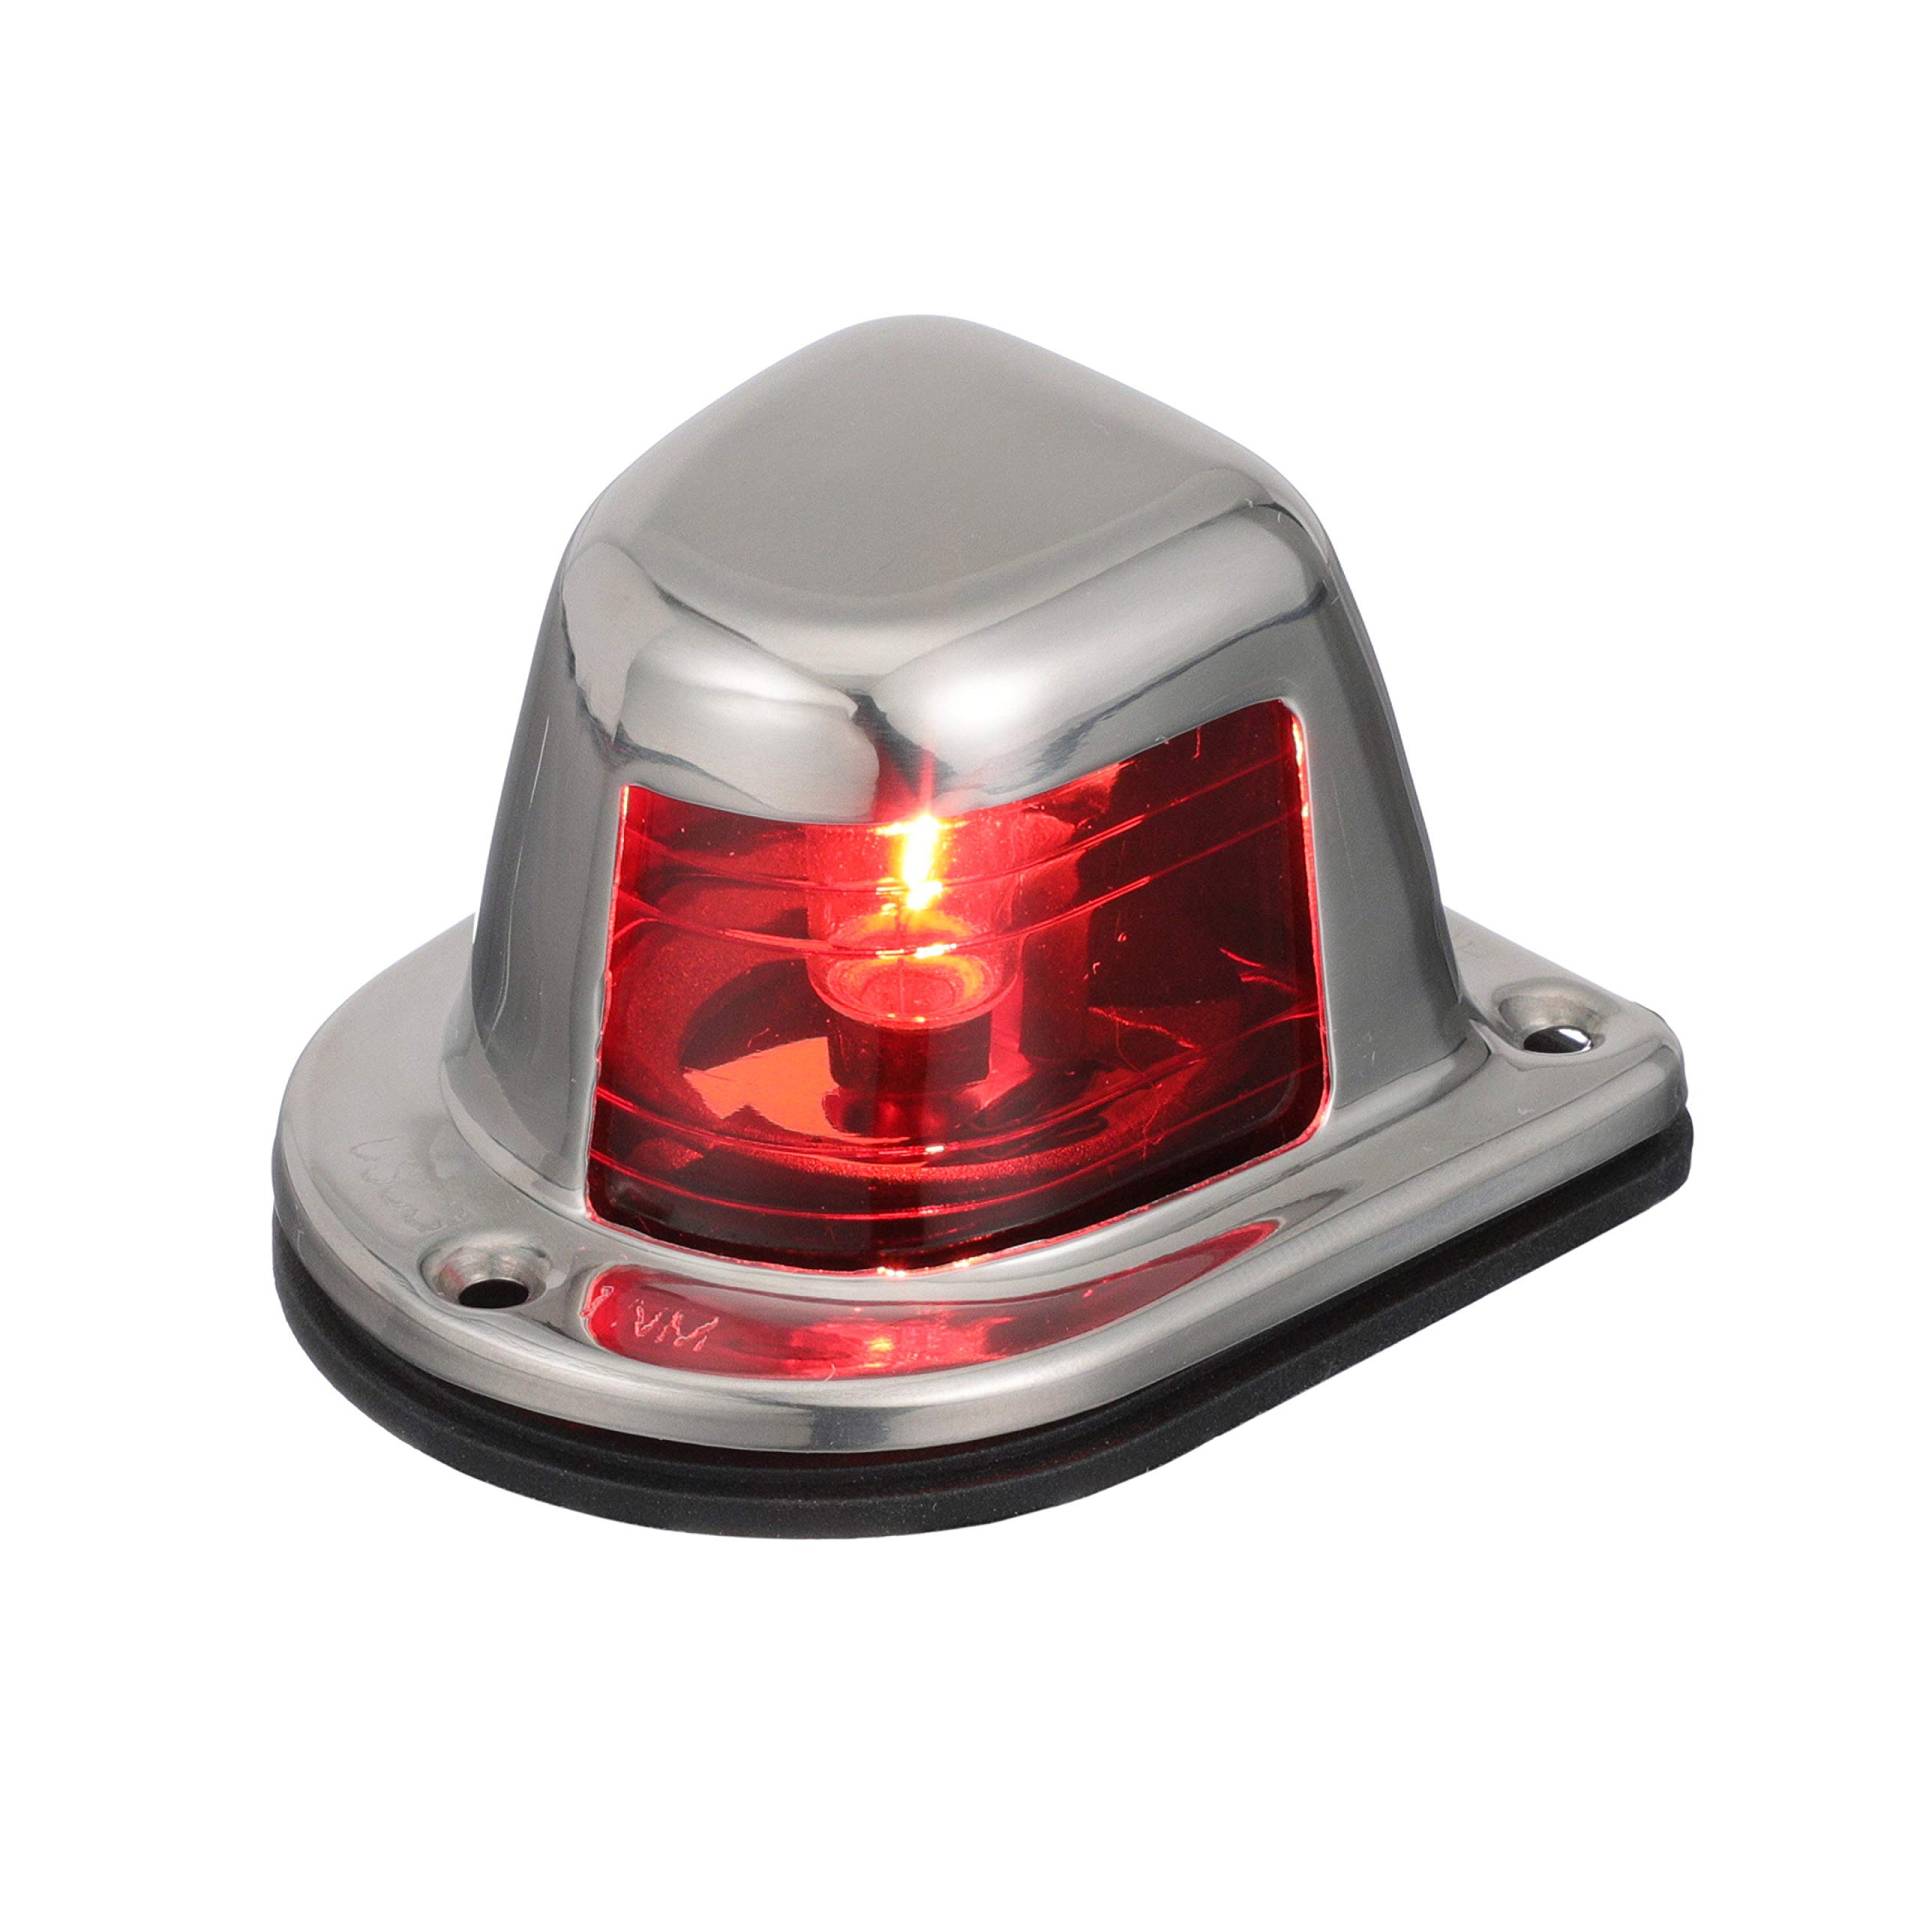 Attwood Sidelight Red 12 V W/Stainless House One Mile von attwood